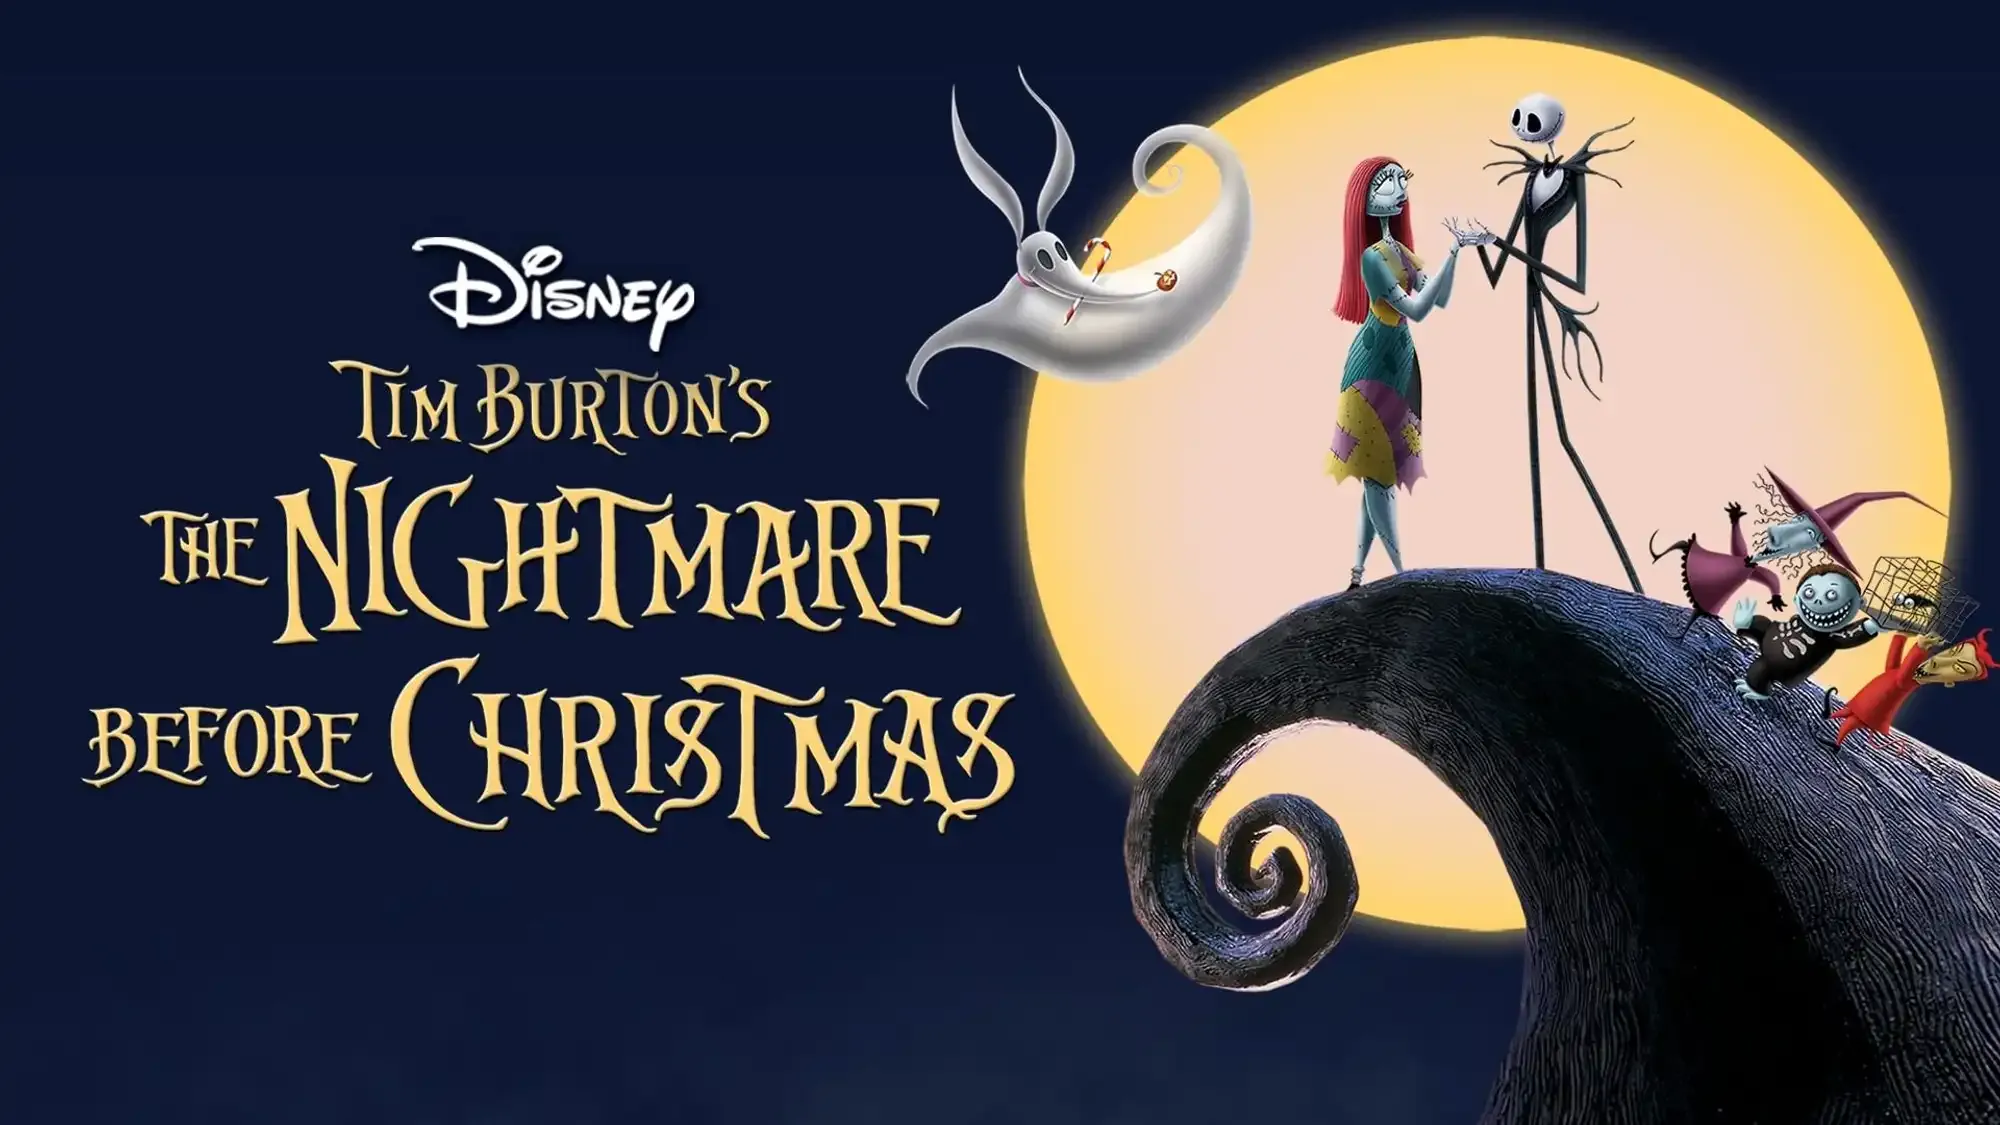 The Nightmare Before Christmas movie review